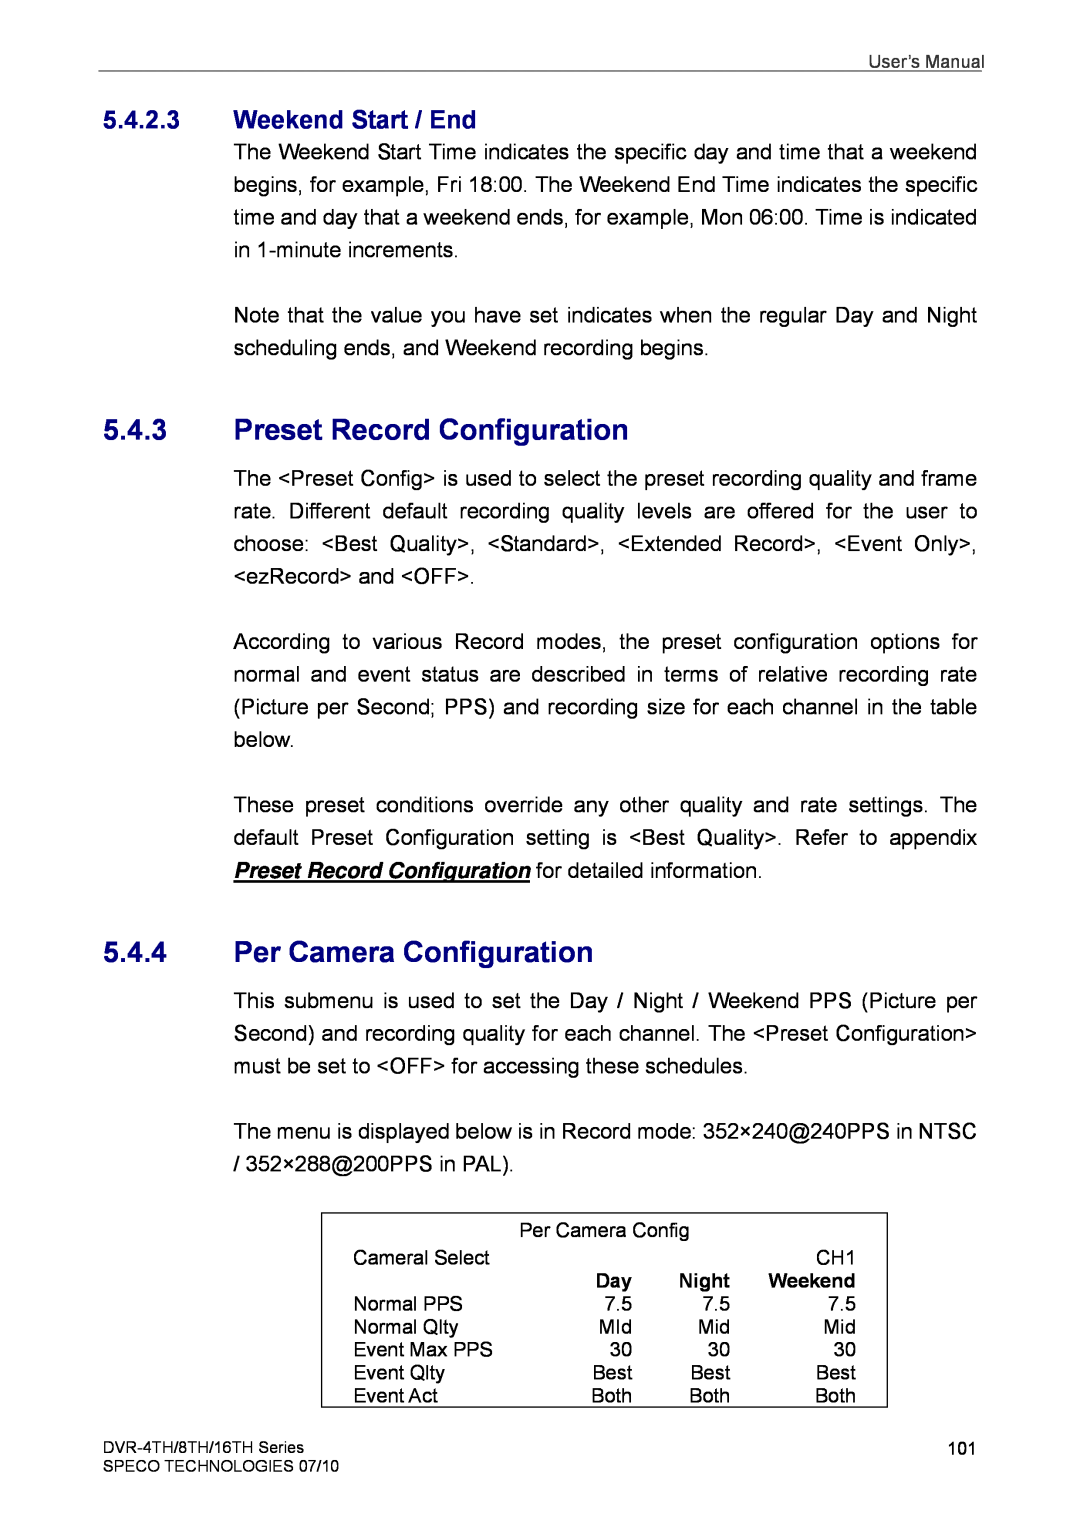 Speco Technologies 8TH, 4TH, 16TH user manual Preset Record Configuration, Per Camera Configuration, Weekend Start / End 